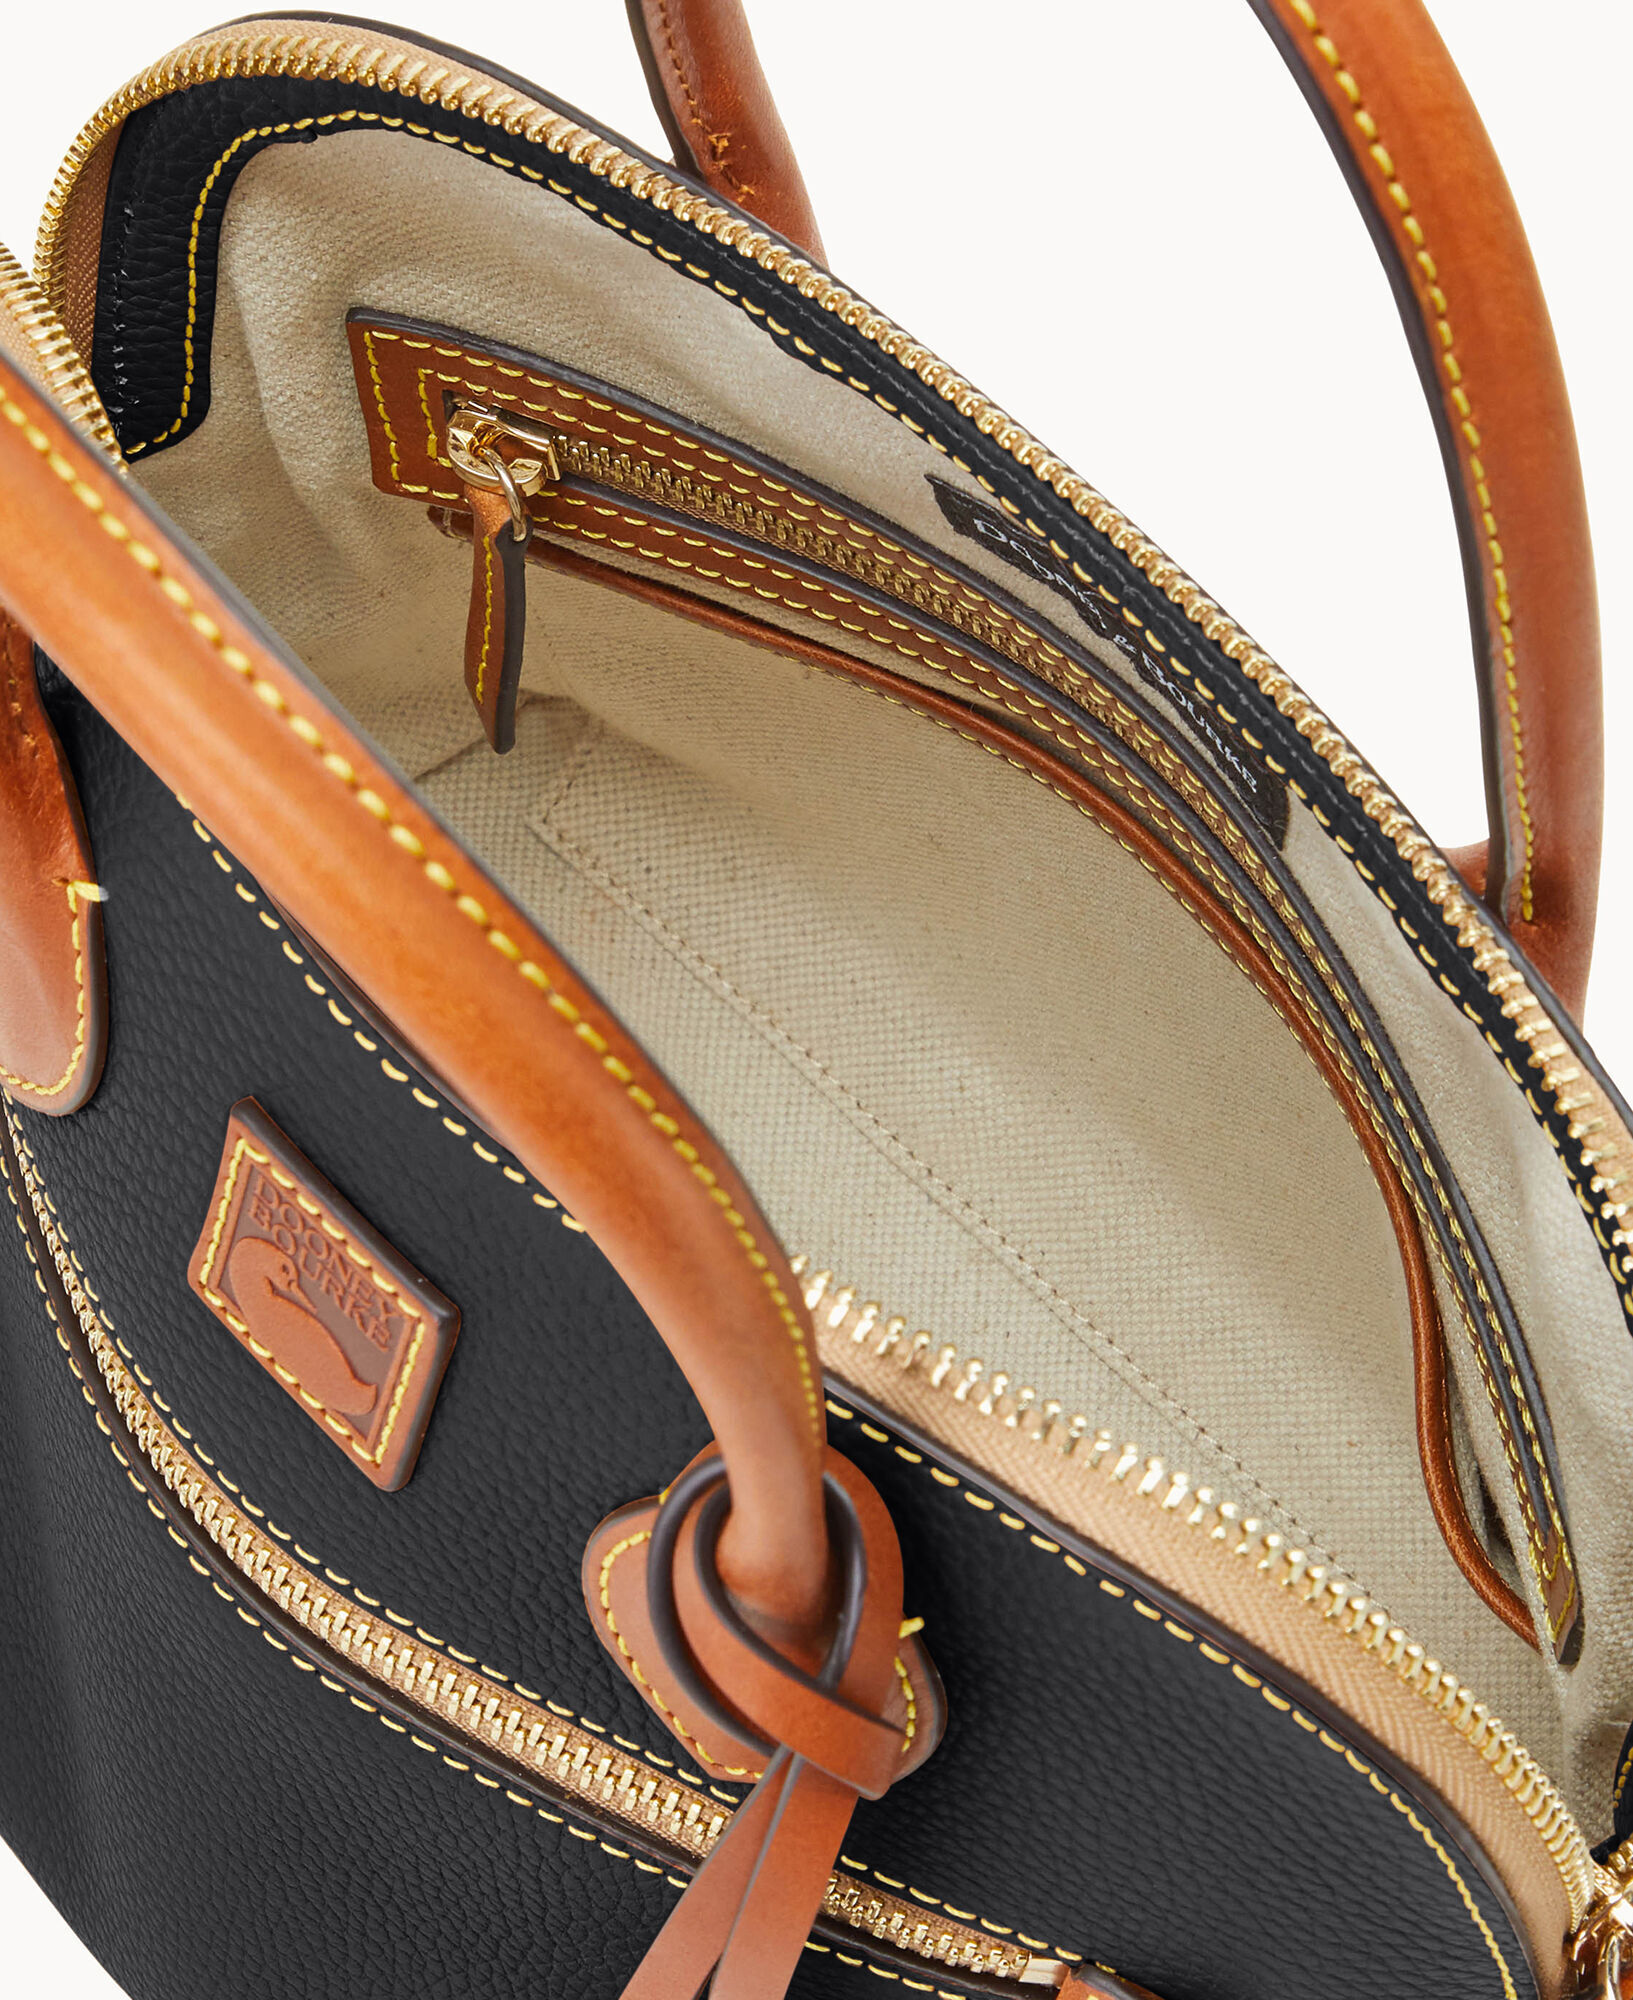 Easy Way to Protect Leather Handbags from Strap Indentations